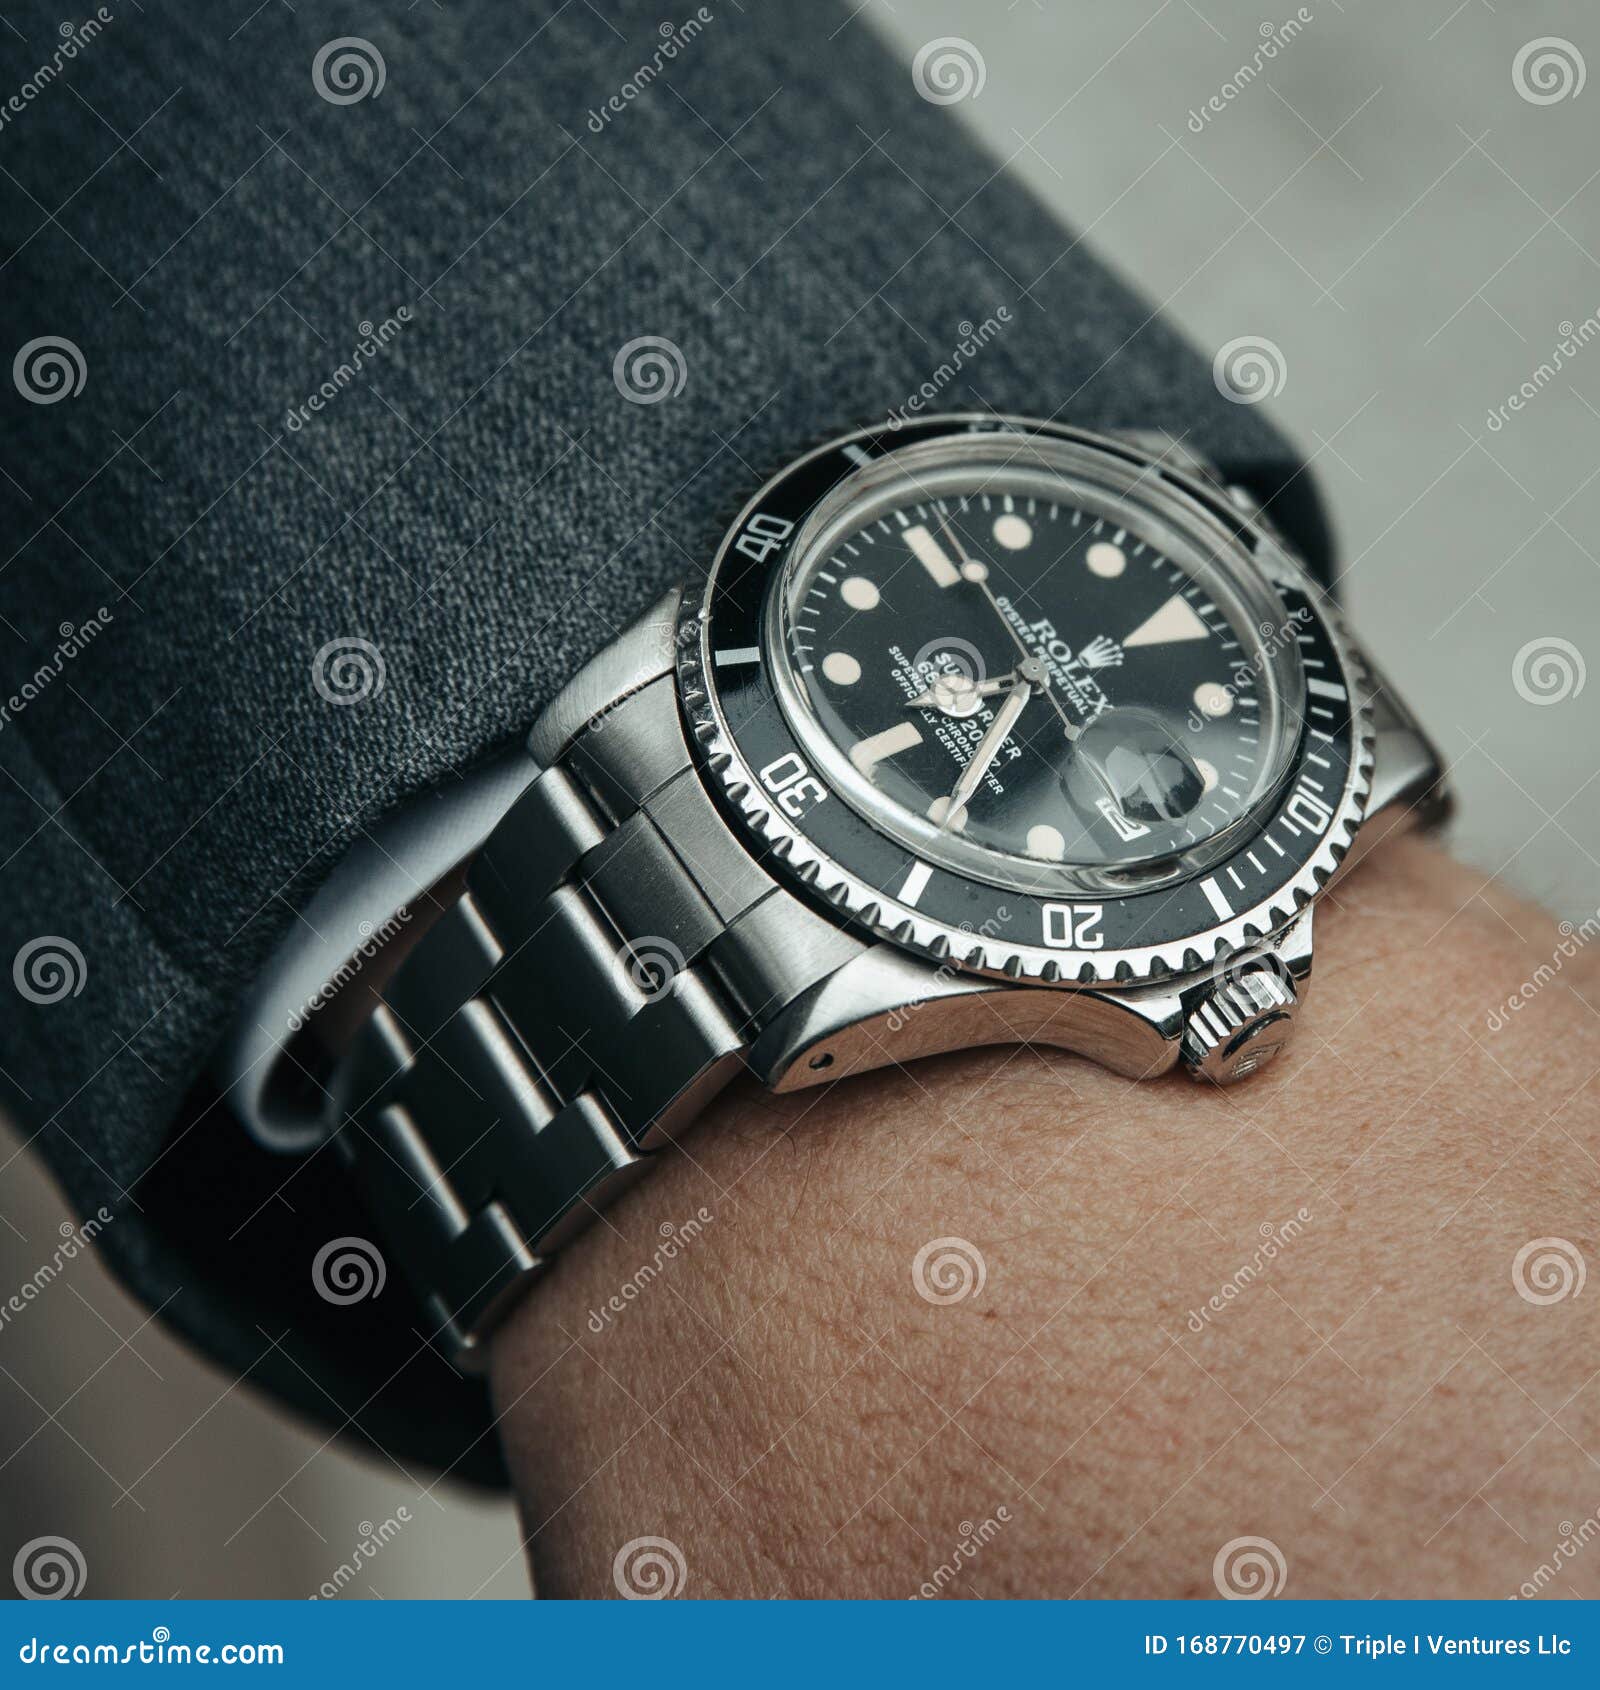 submariner with suit